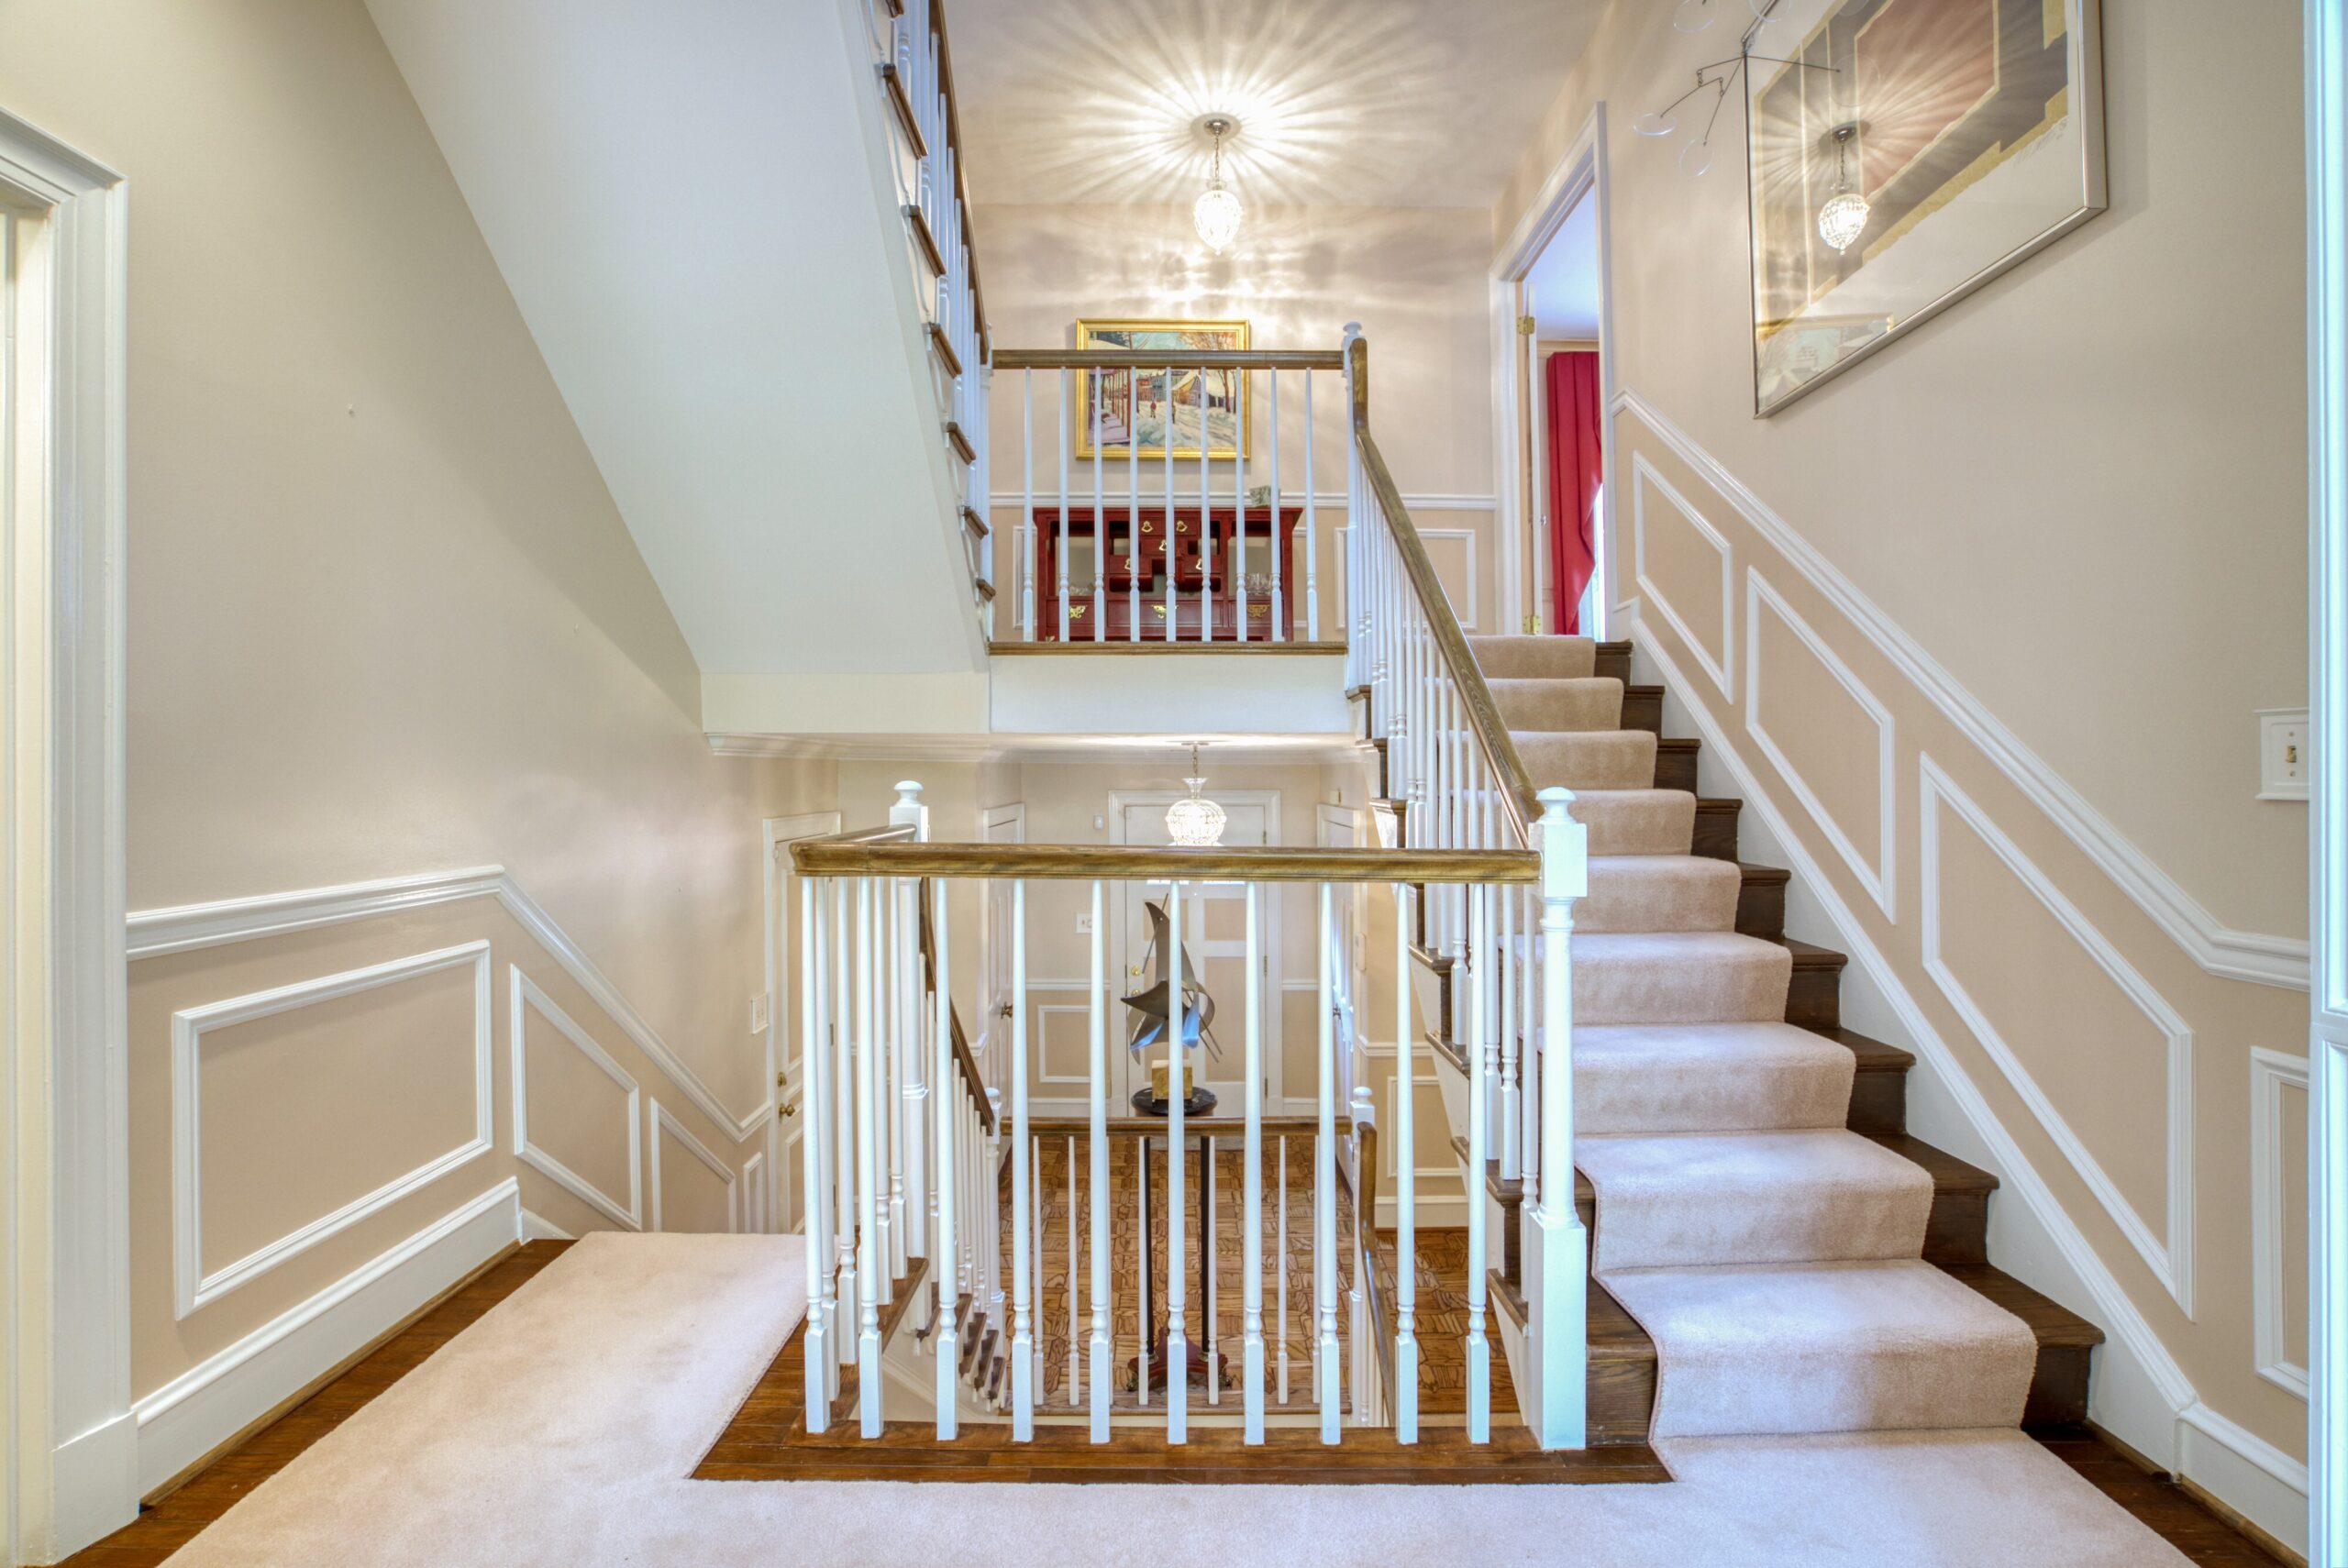 Interior professional photo of 1324 Skipwith Road - showing front entry hall and spiral staircase leading down and up